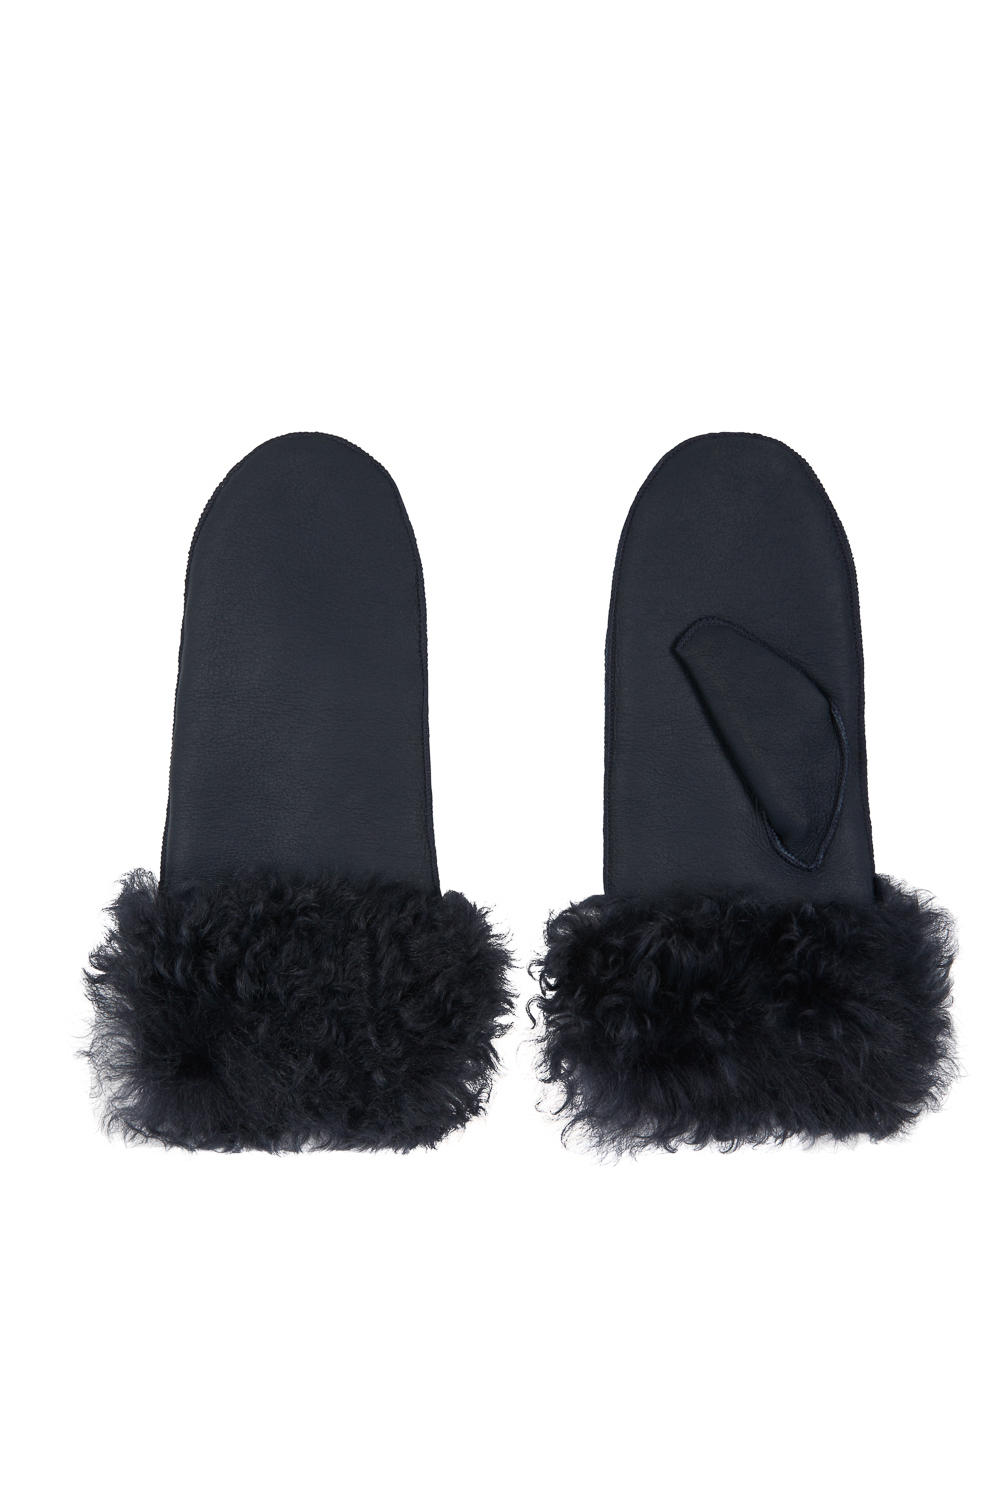 Full Palm Shearling Mittens